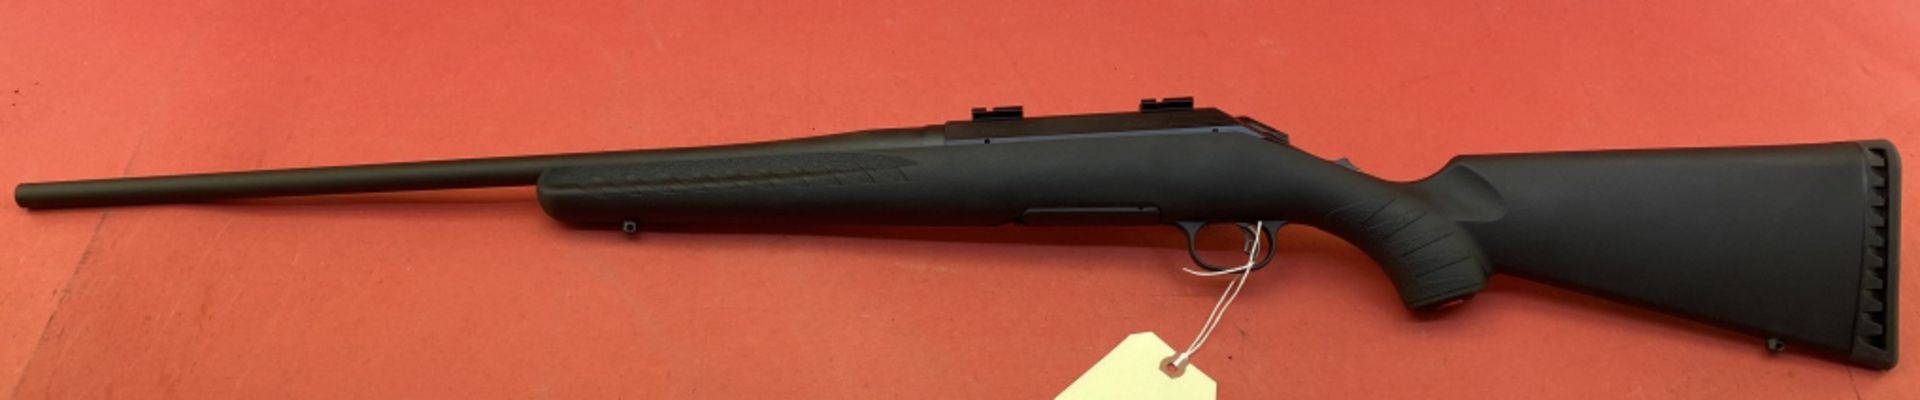 Ruger American Rifle .308 Rifle - Image 9 of 9